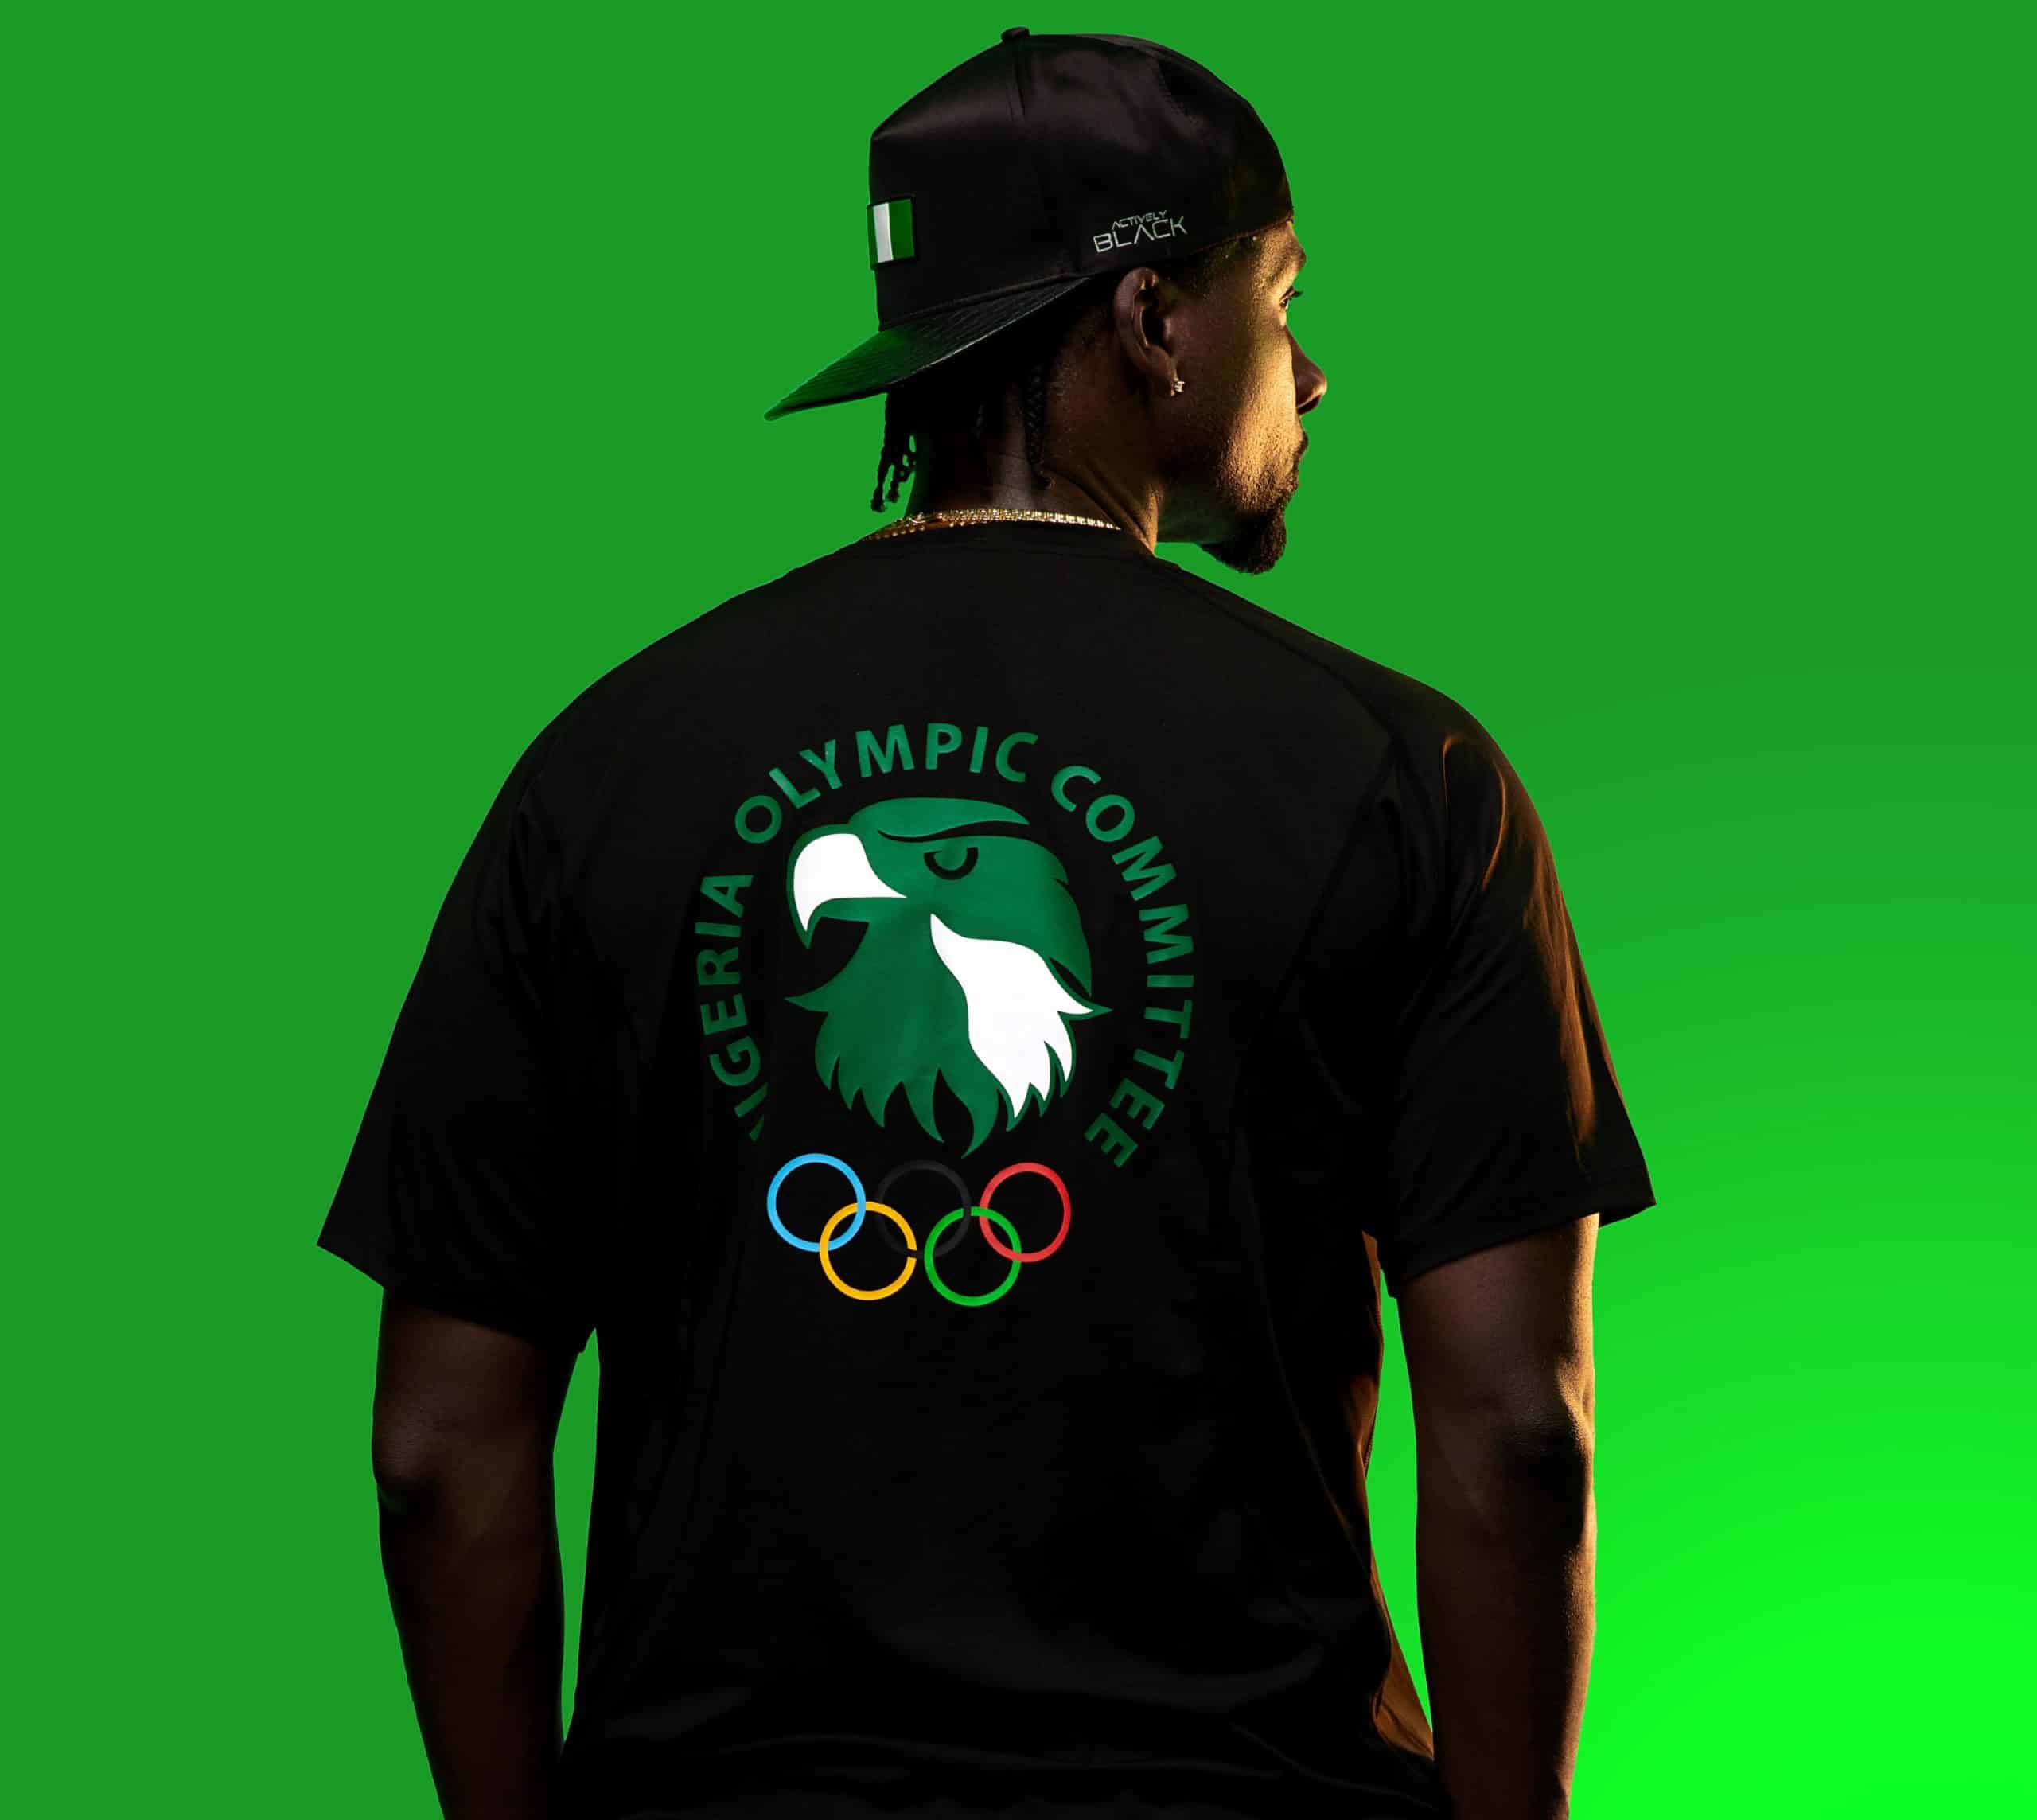 Sports couture for the Olympics; image by Sammy Oguejiofor1